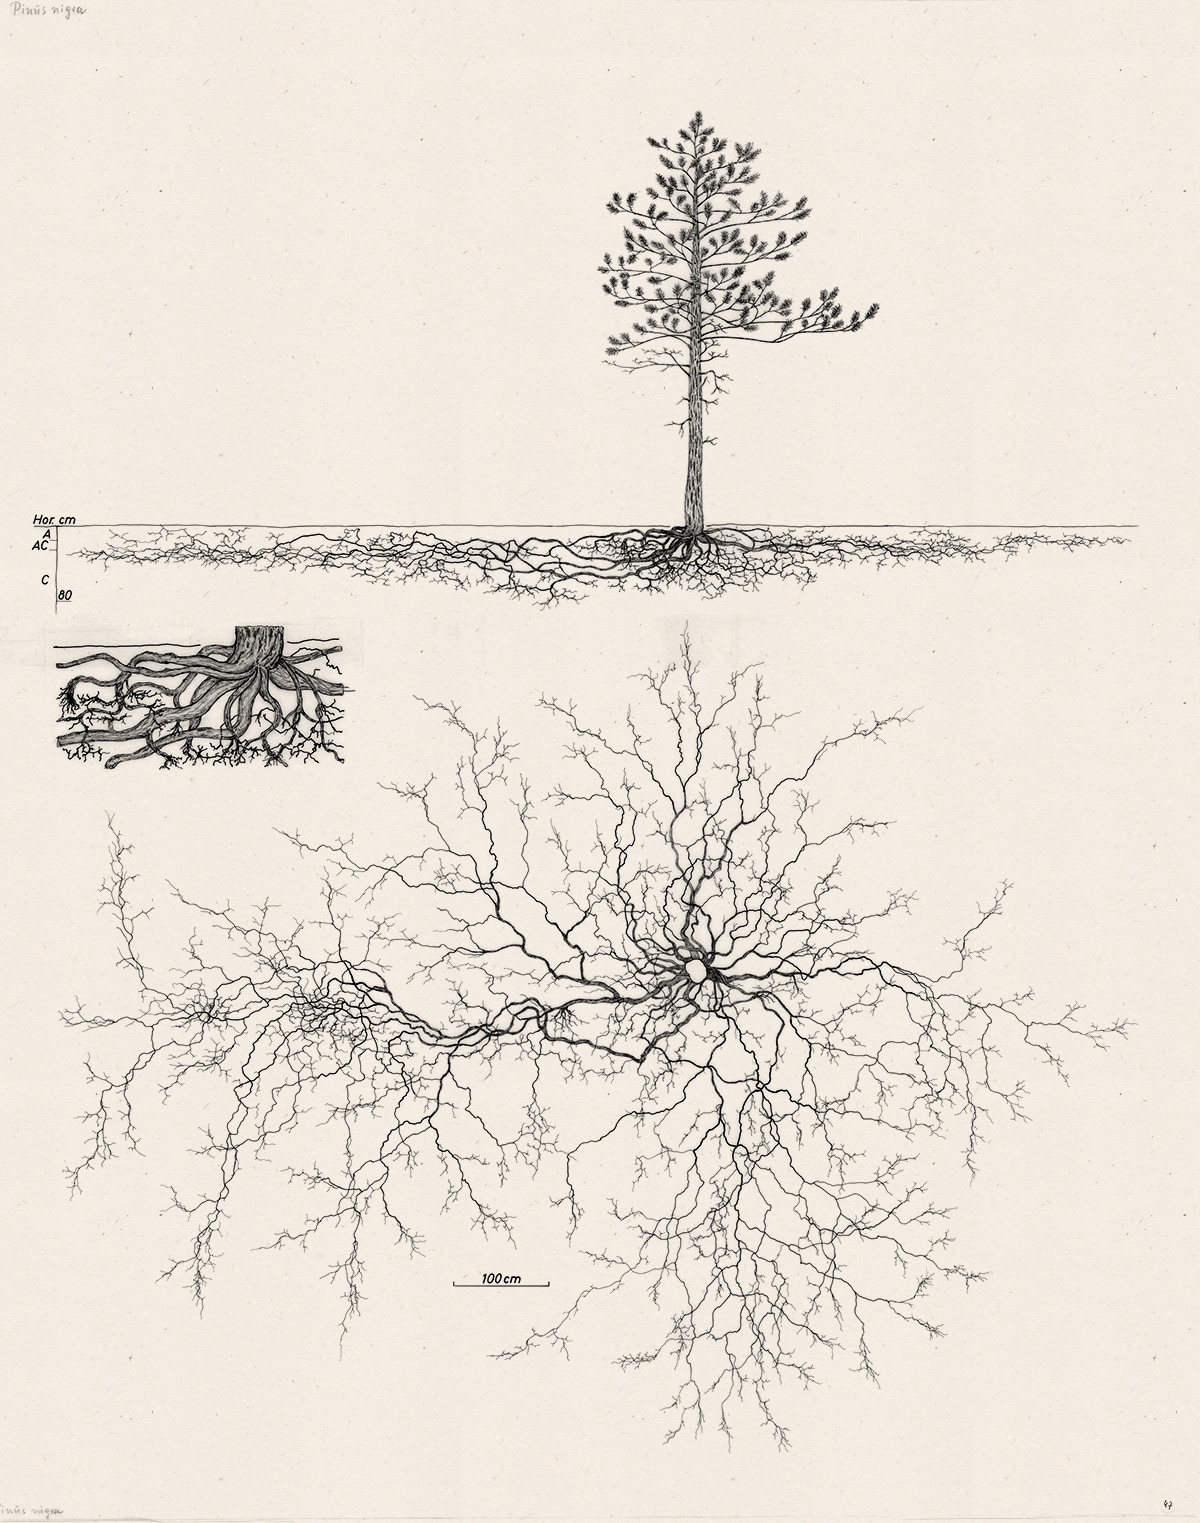 Two black pines <em>(Pinus nigra)</em> with radically different root structures based on their location